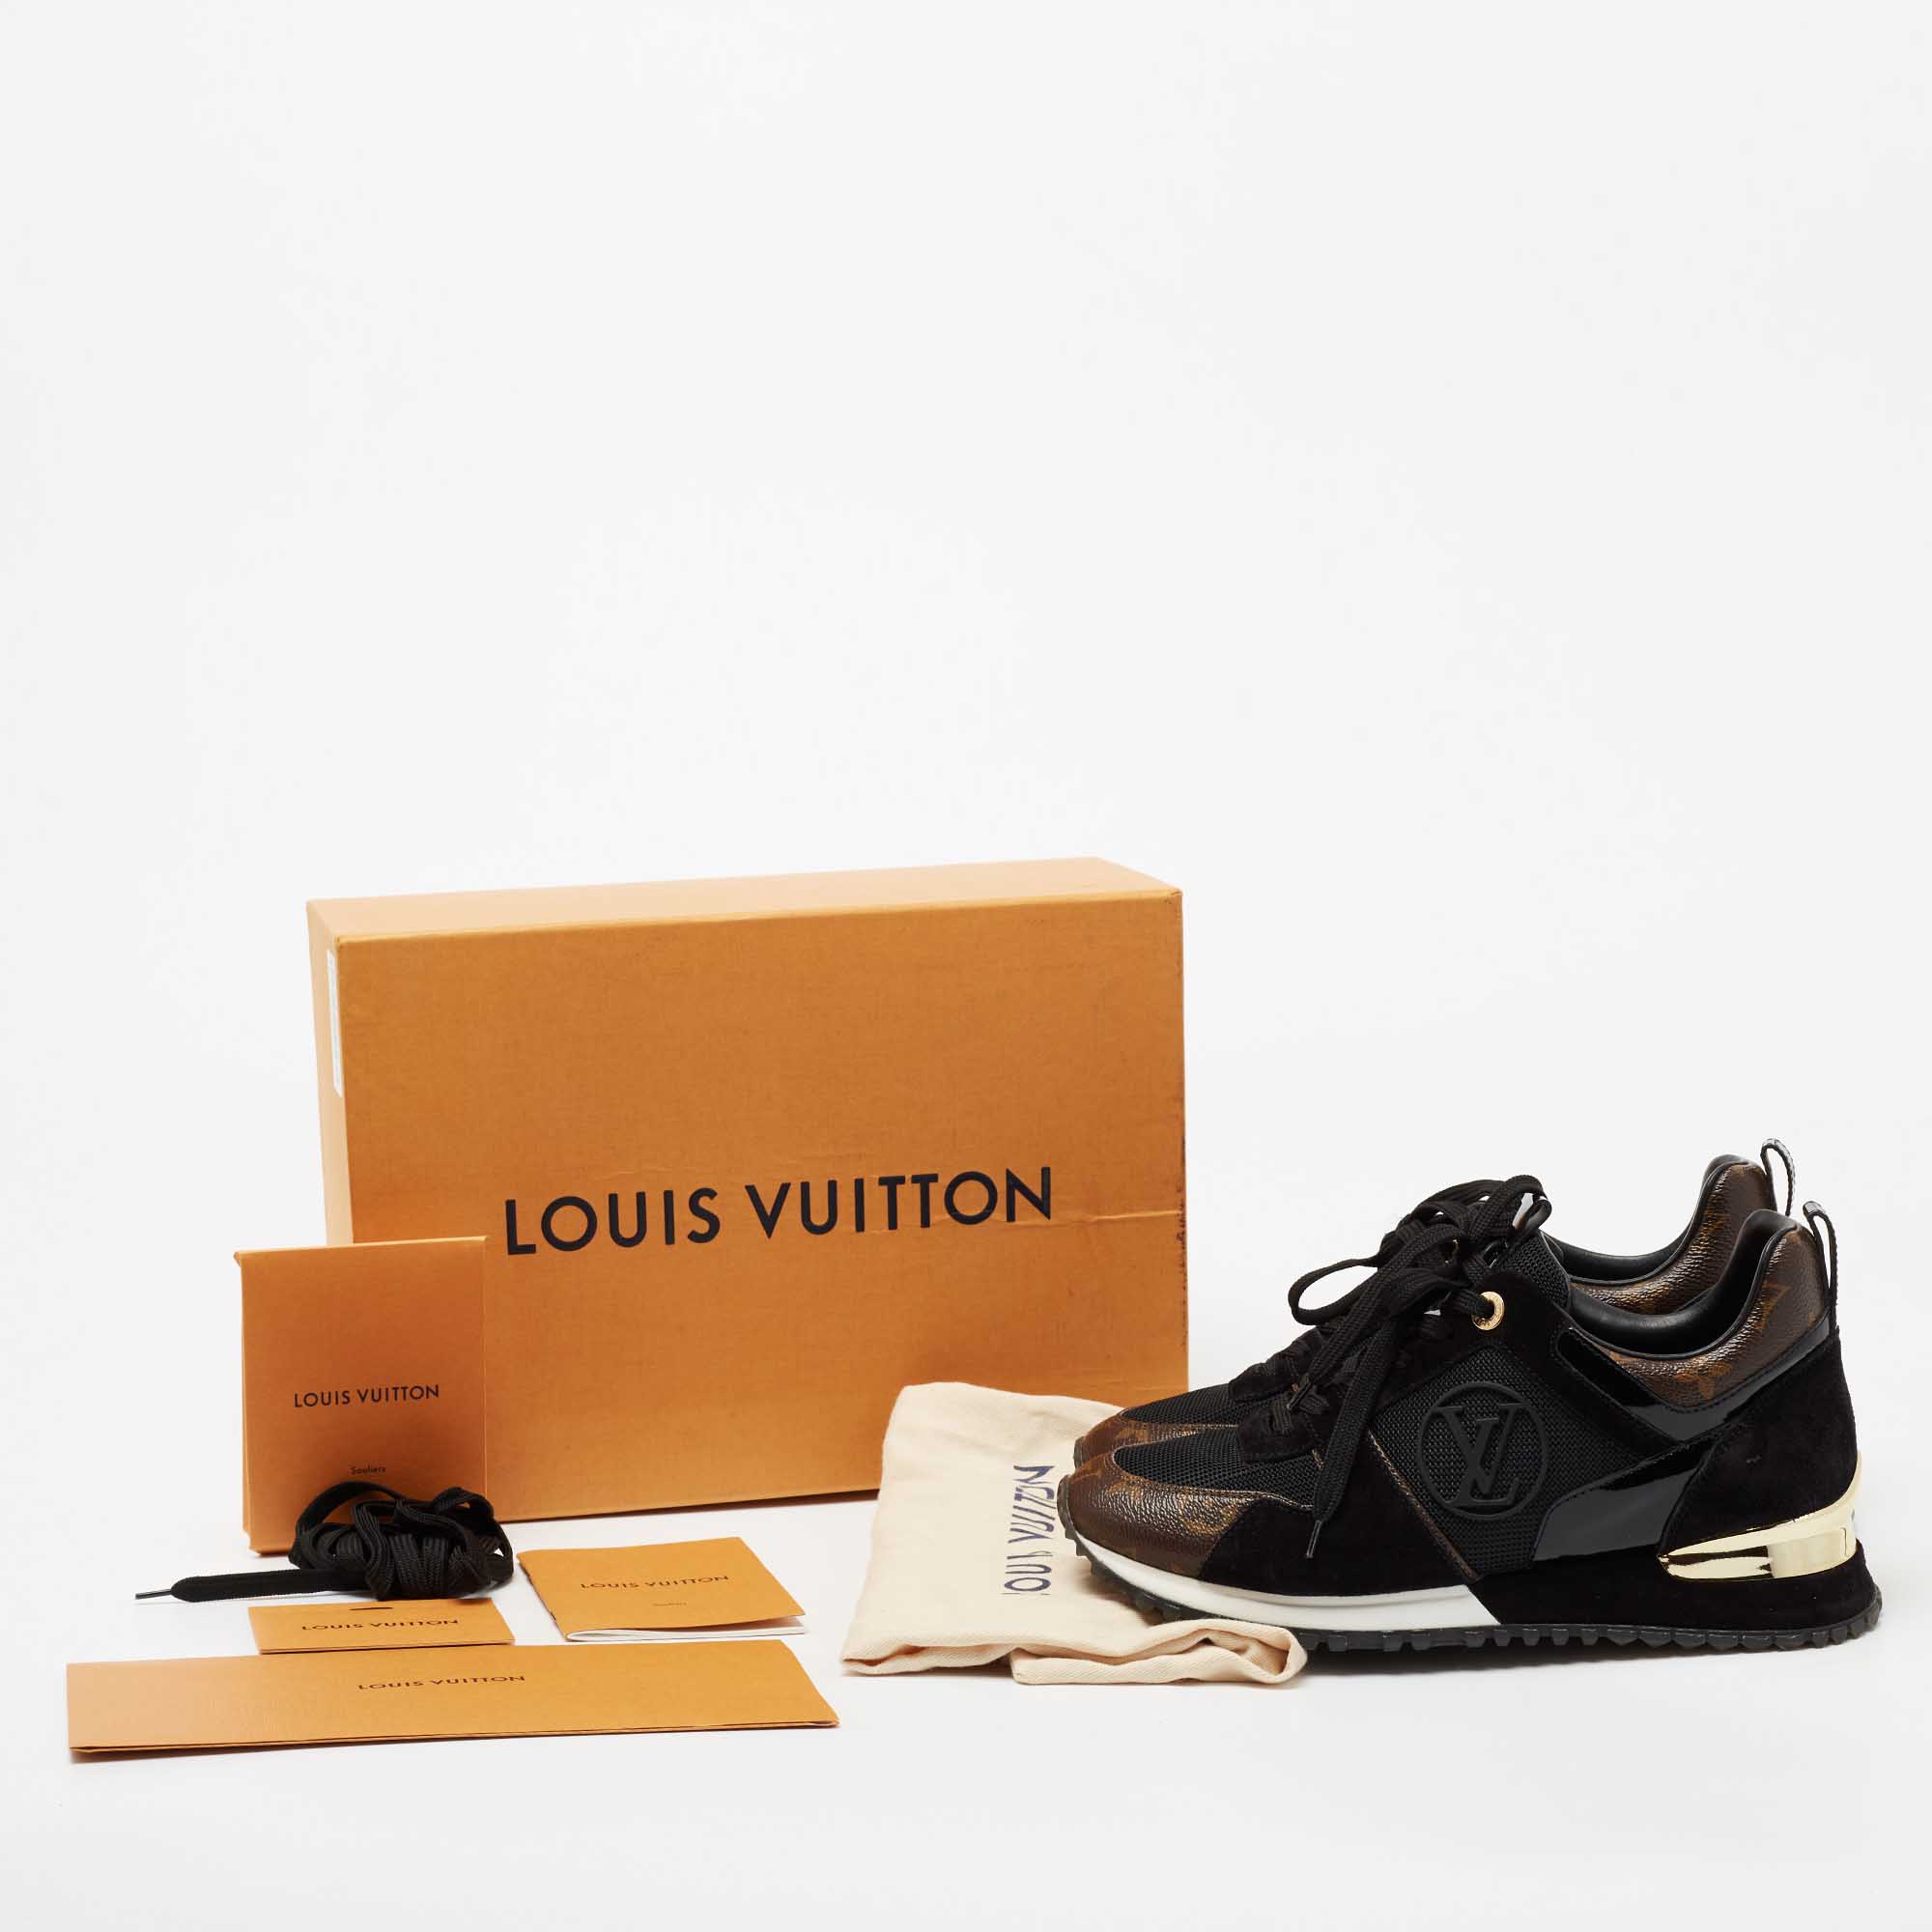 Run away leather trainers Louis Vuitton Black size 37 EU in Leather -  26330227